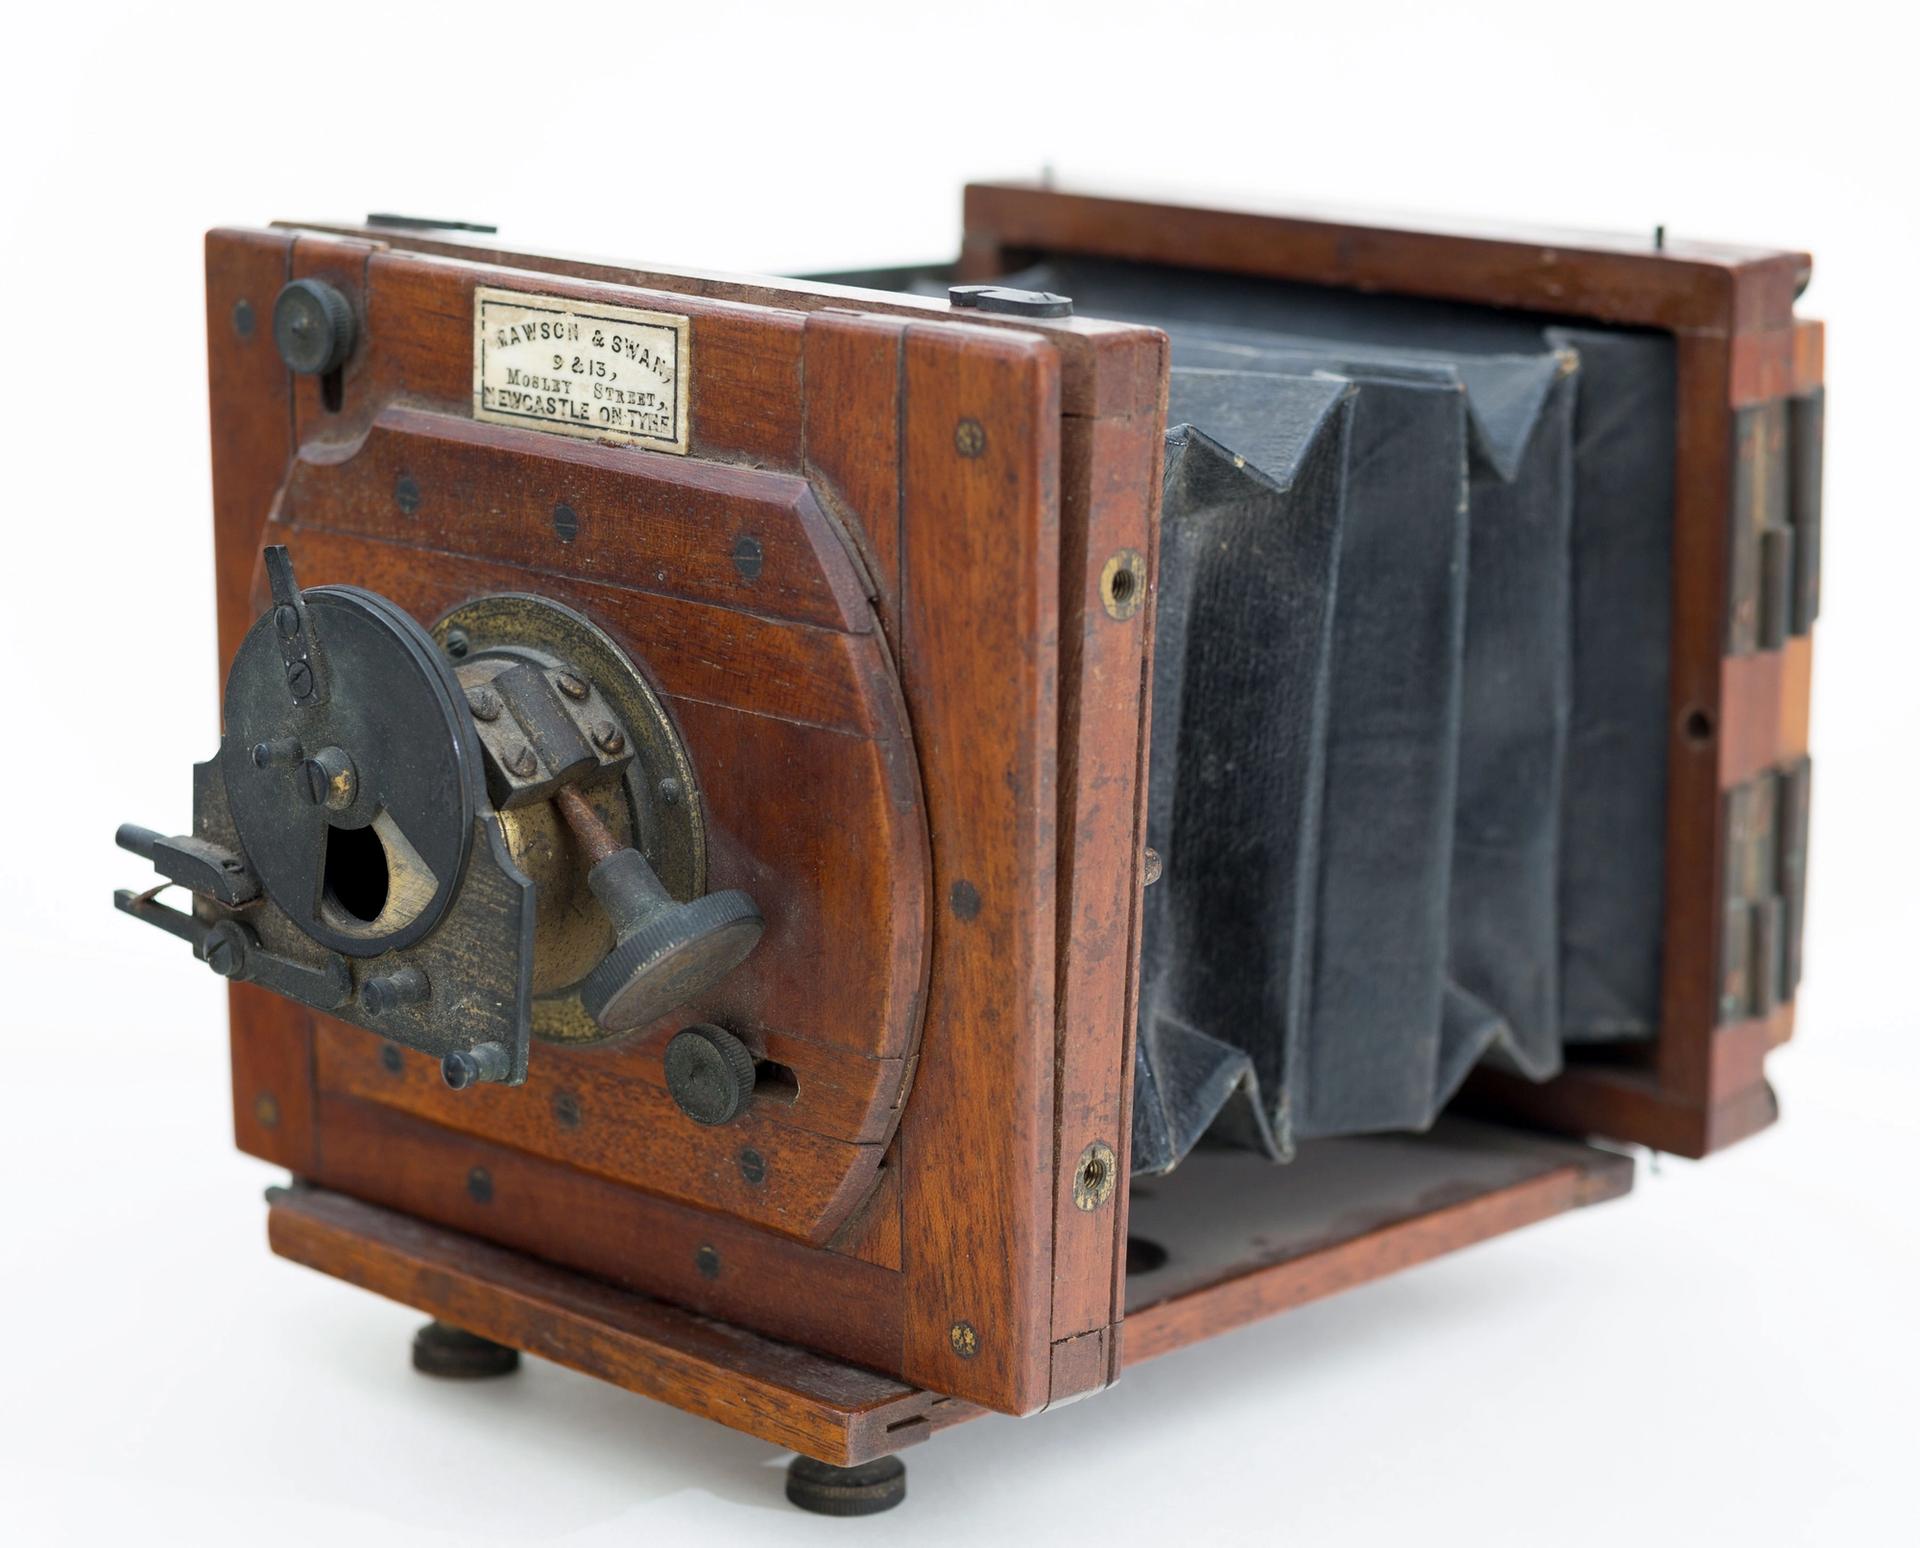 Mawson & Swan camera owned by Winslow Homer, around 1882 Photo: Dennis Griggs, Tannery Hill Studio, Topsham, Maine. Gift of Neal Paulsen, in memory of James Ott and in honor of David James Ott ’74. Bowdoin College Museum of Art, Brunswick, Maine